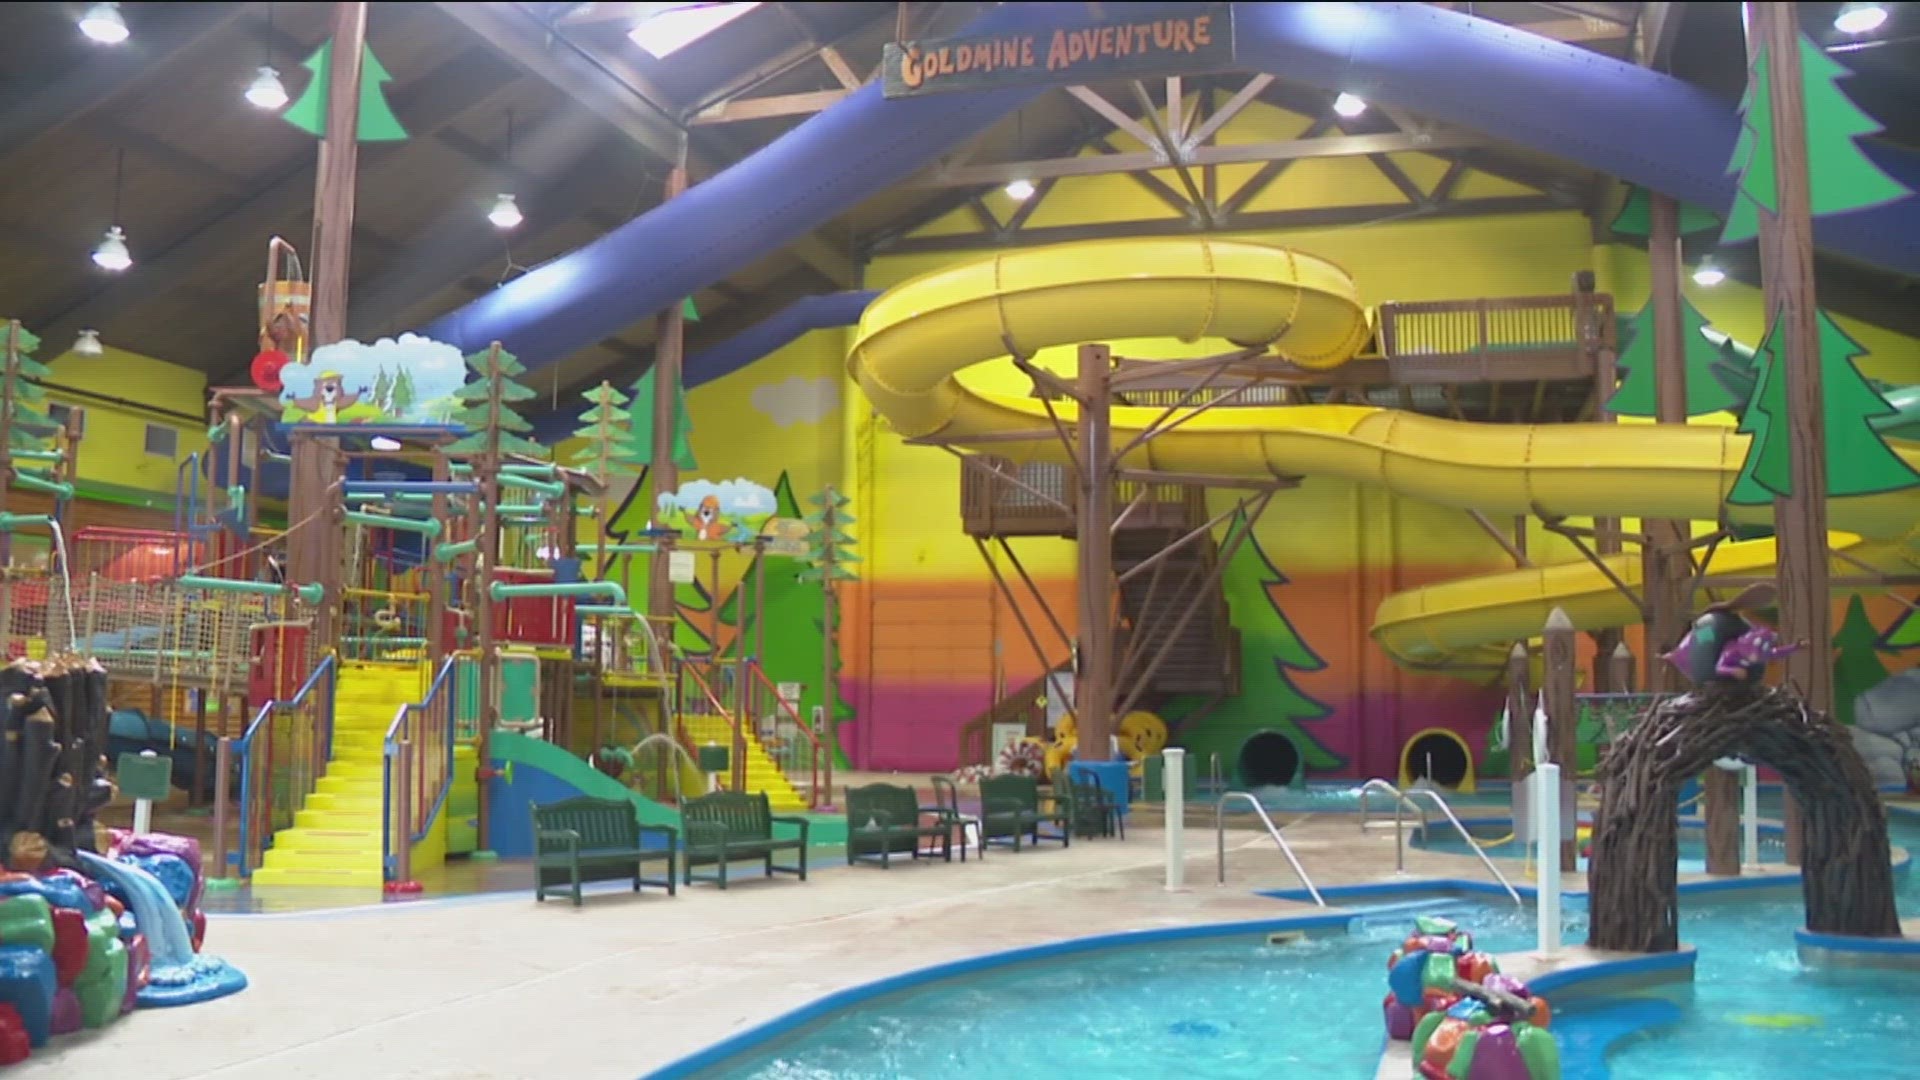 Owners of the long-shuttered water park say they're ready to get back to business once staff is in place and inspections are done.